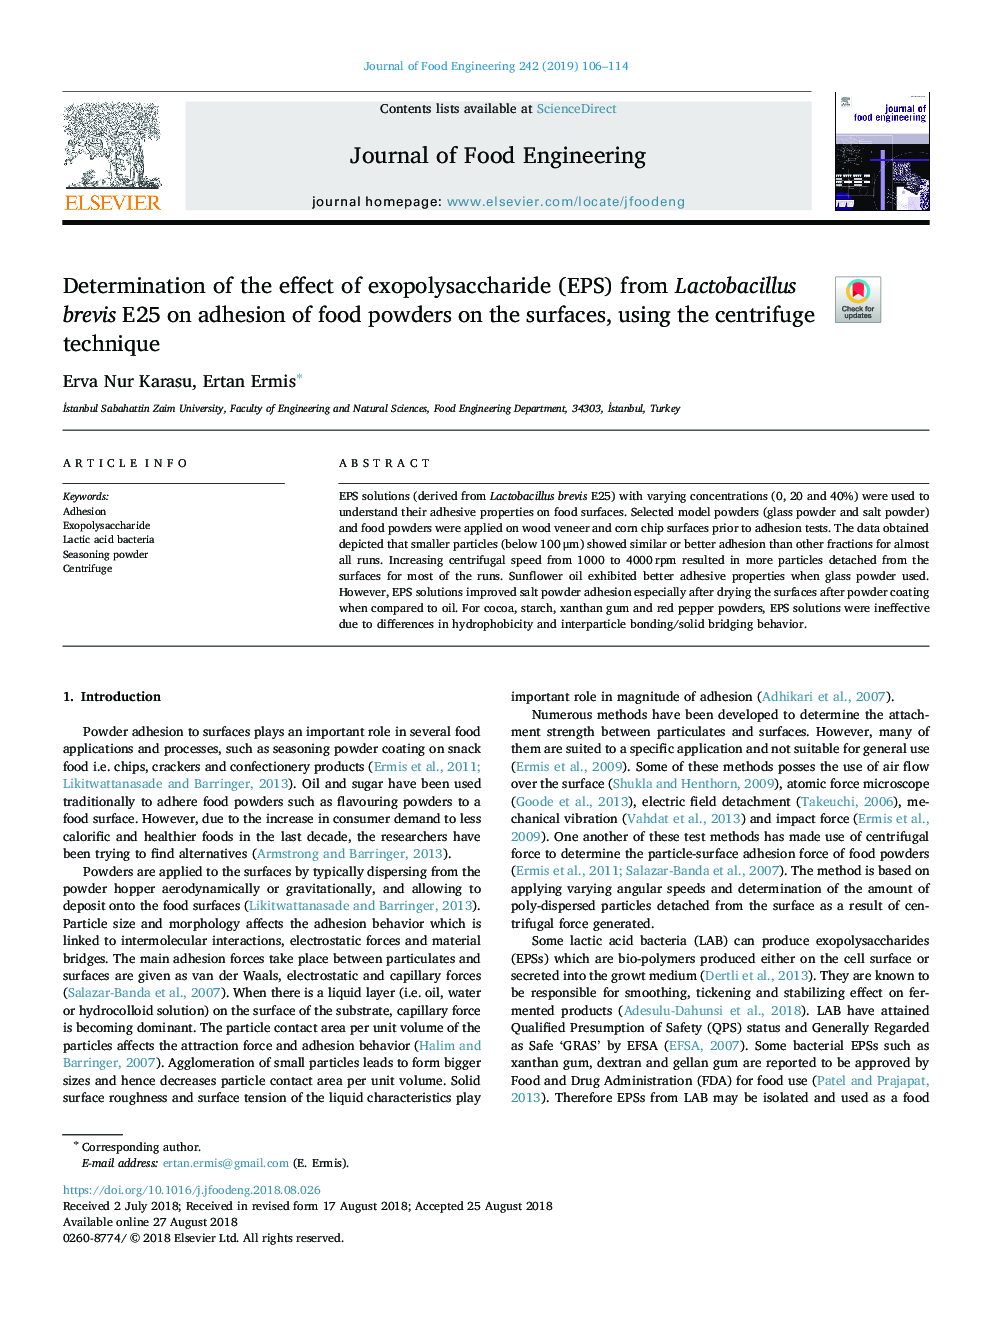 Determination of the effect of exopolysaccharide (EPS) from Lactobacillus brevis E25 on adhesion of food powders on the surfaces, using the centrifuge technique